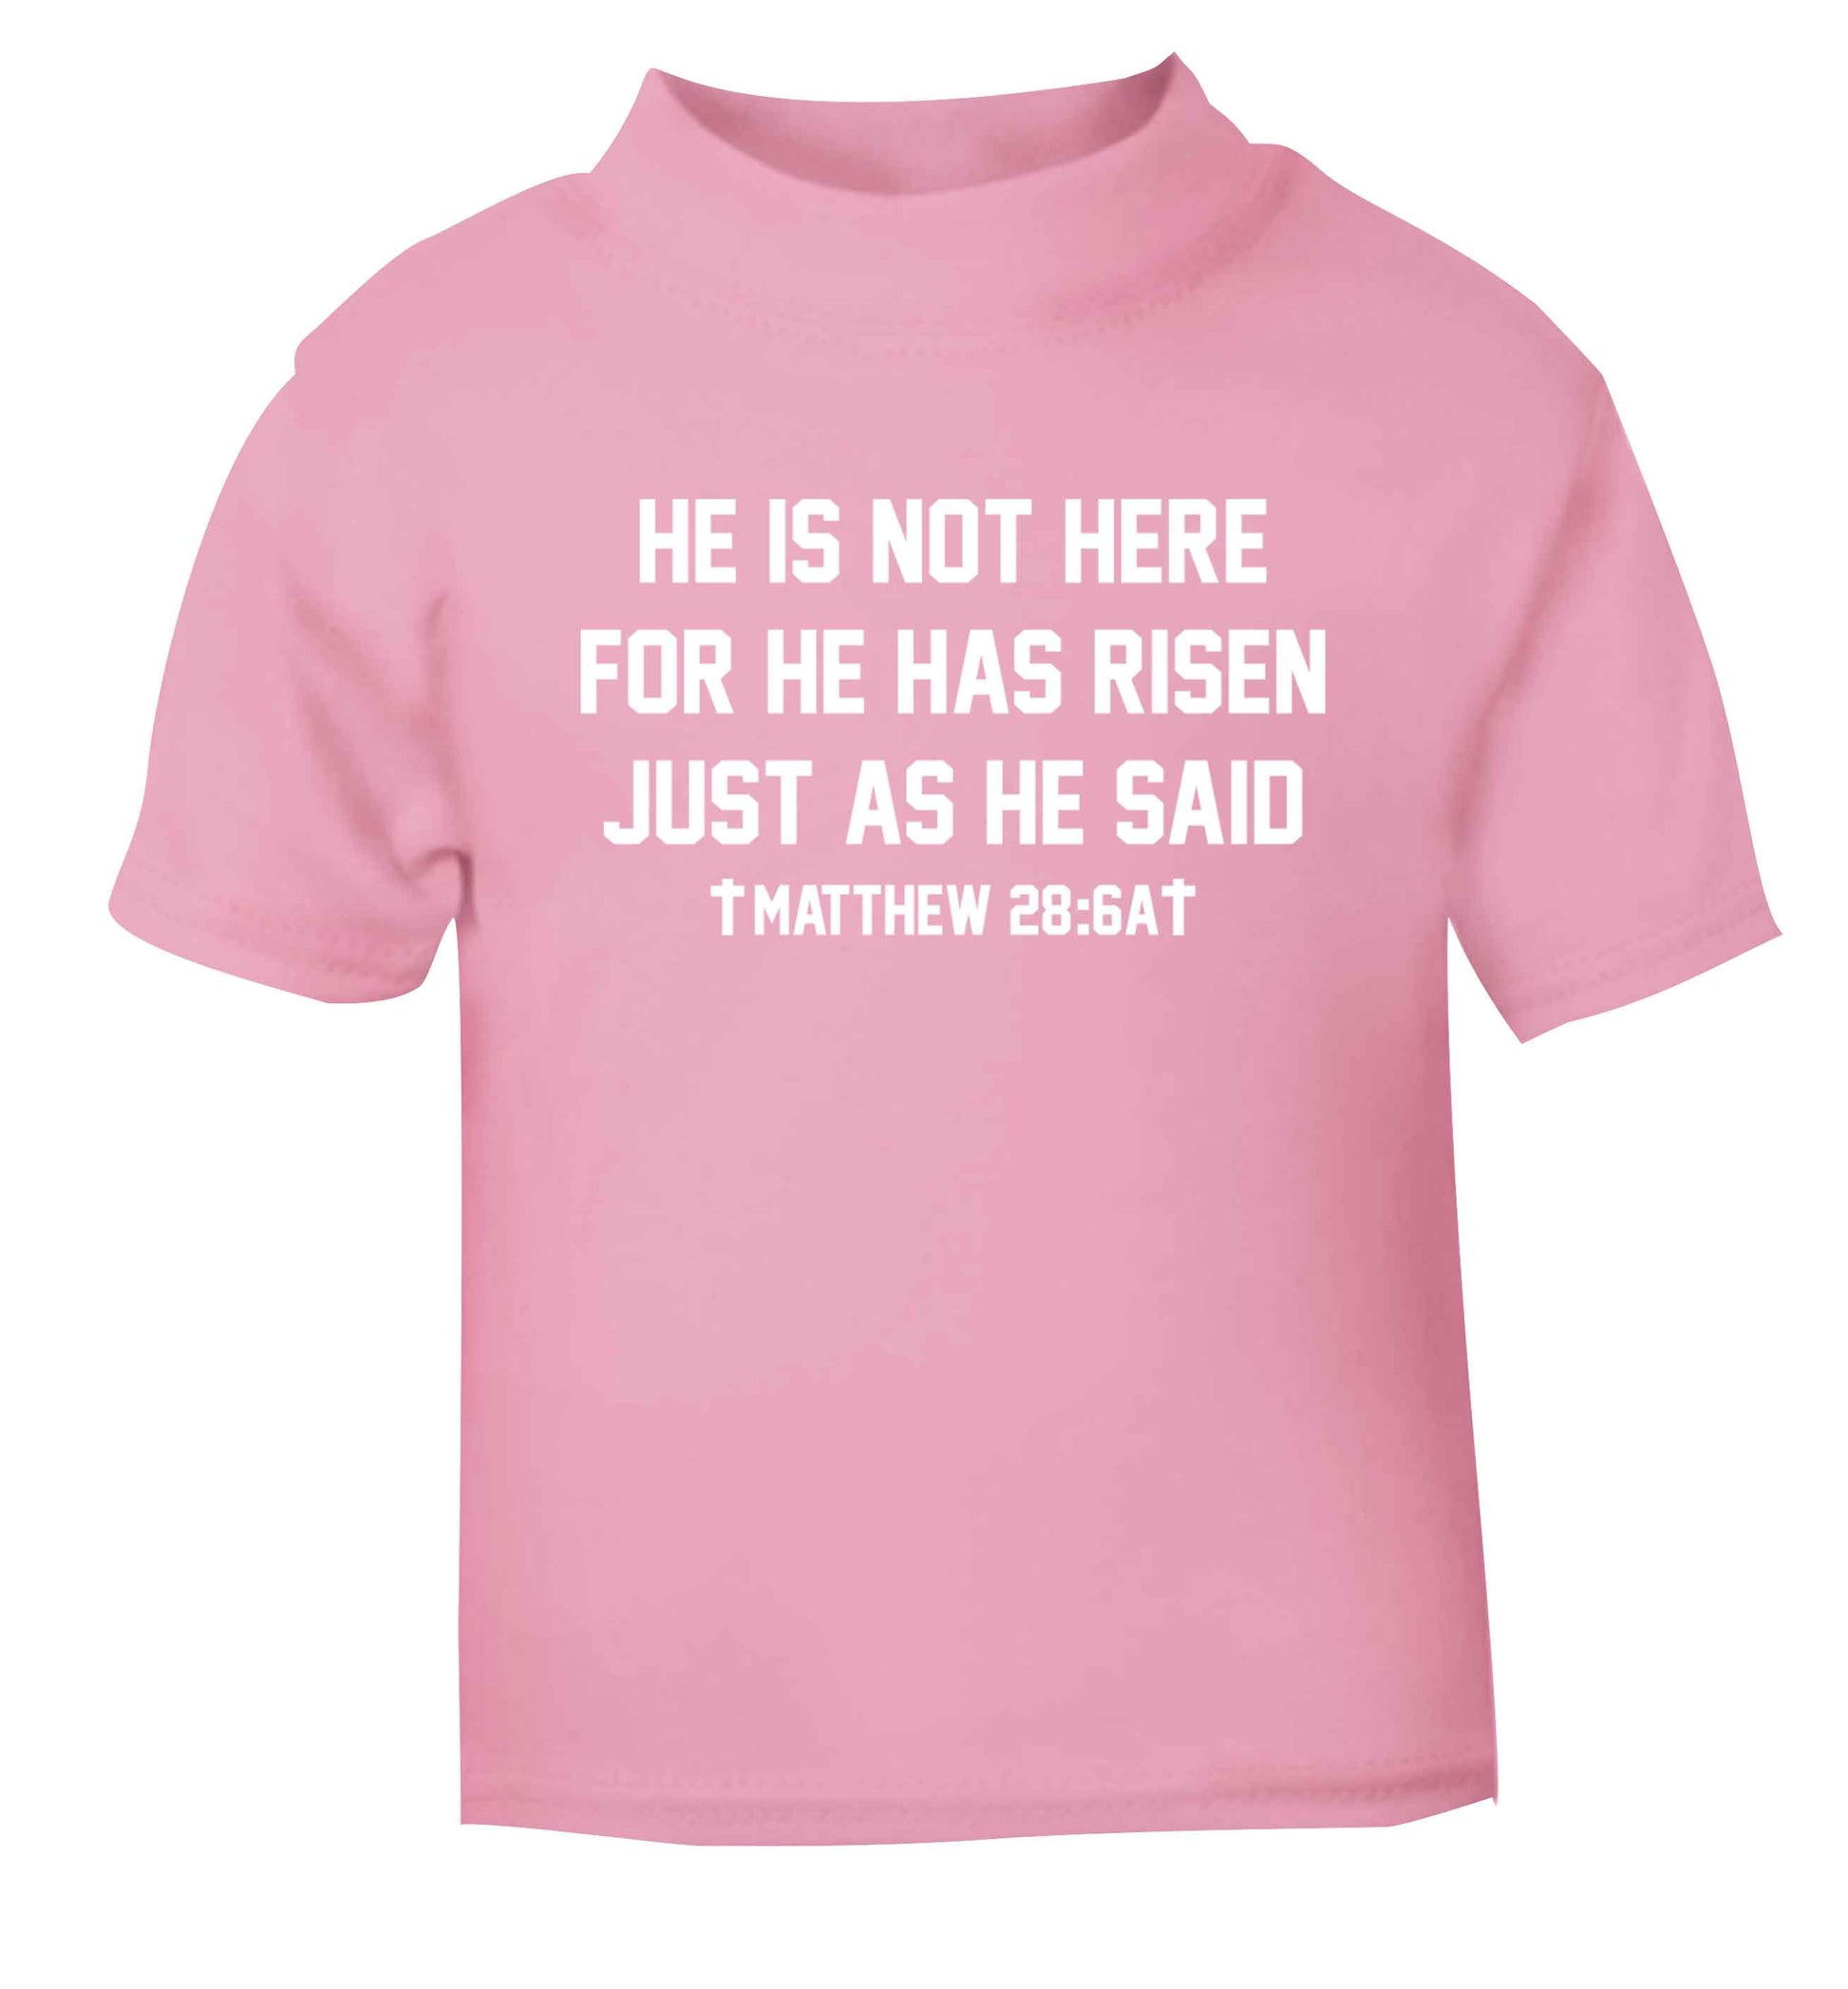 He is not here for he has risen just as he said matthew 28:6A light pink baby toddler Tshirt 2 Years